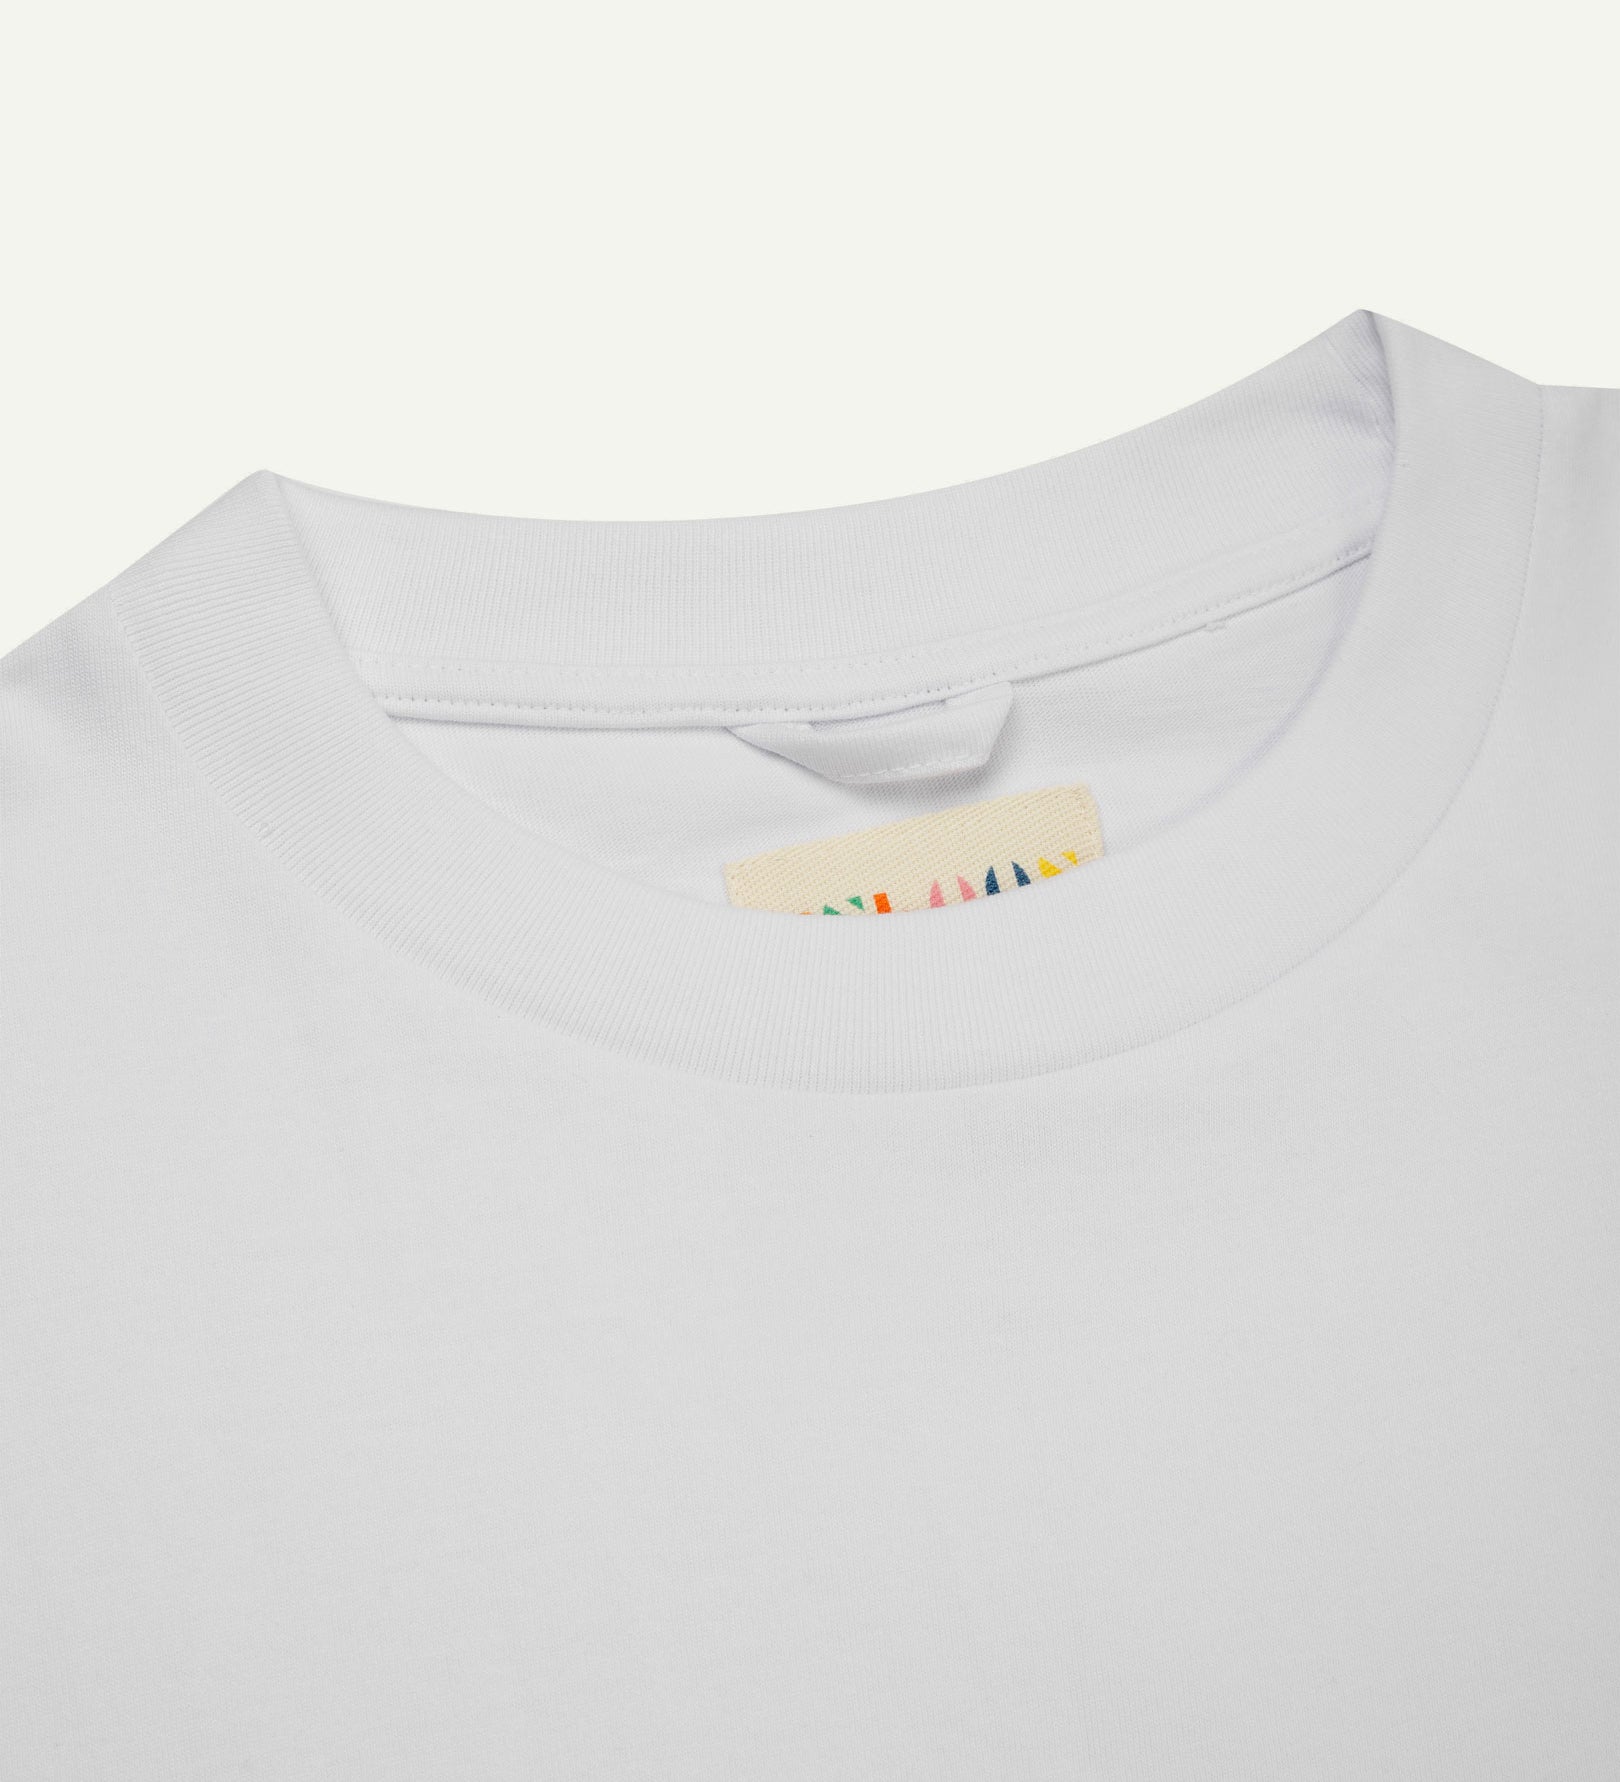 Neckline close-up of white organic cotton oversized T-shirt showing hanging loop and Uskees branding label.